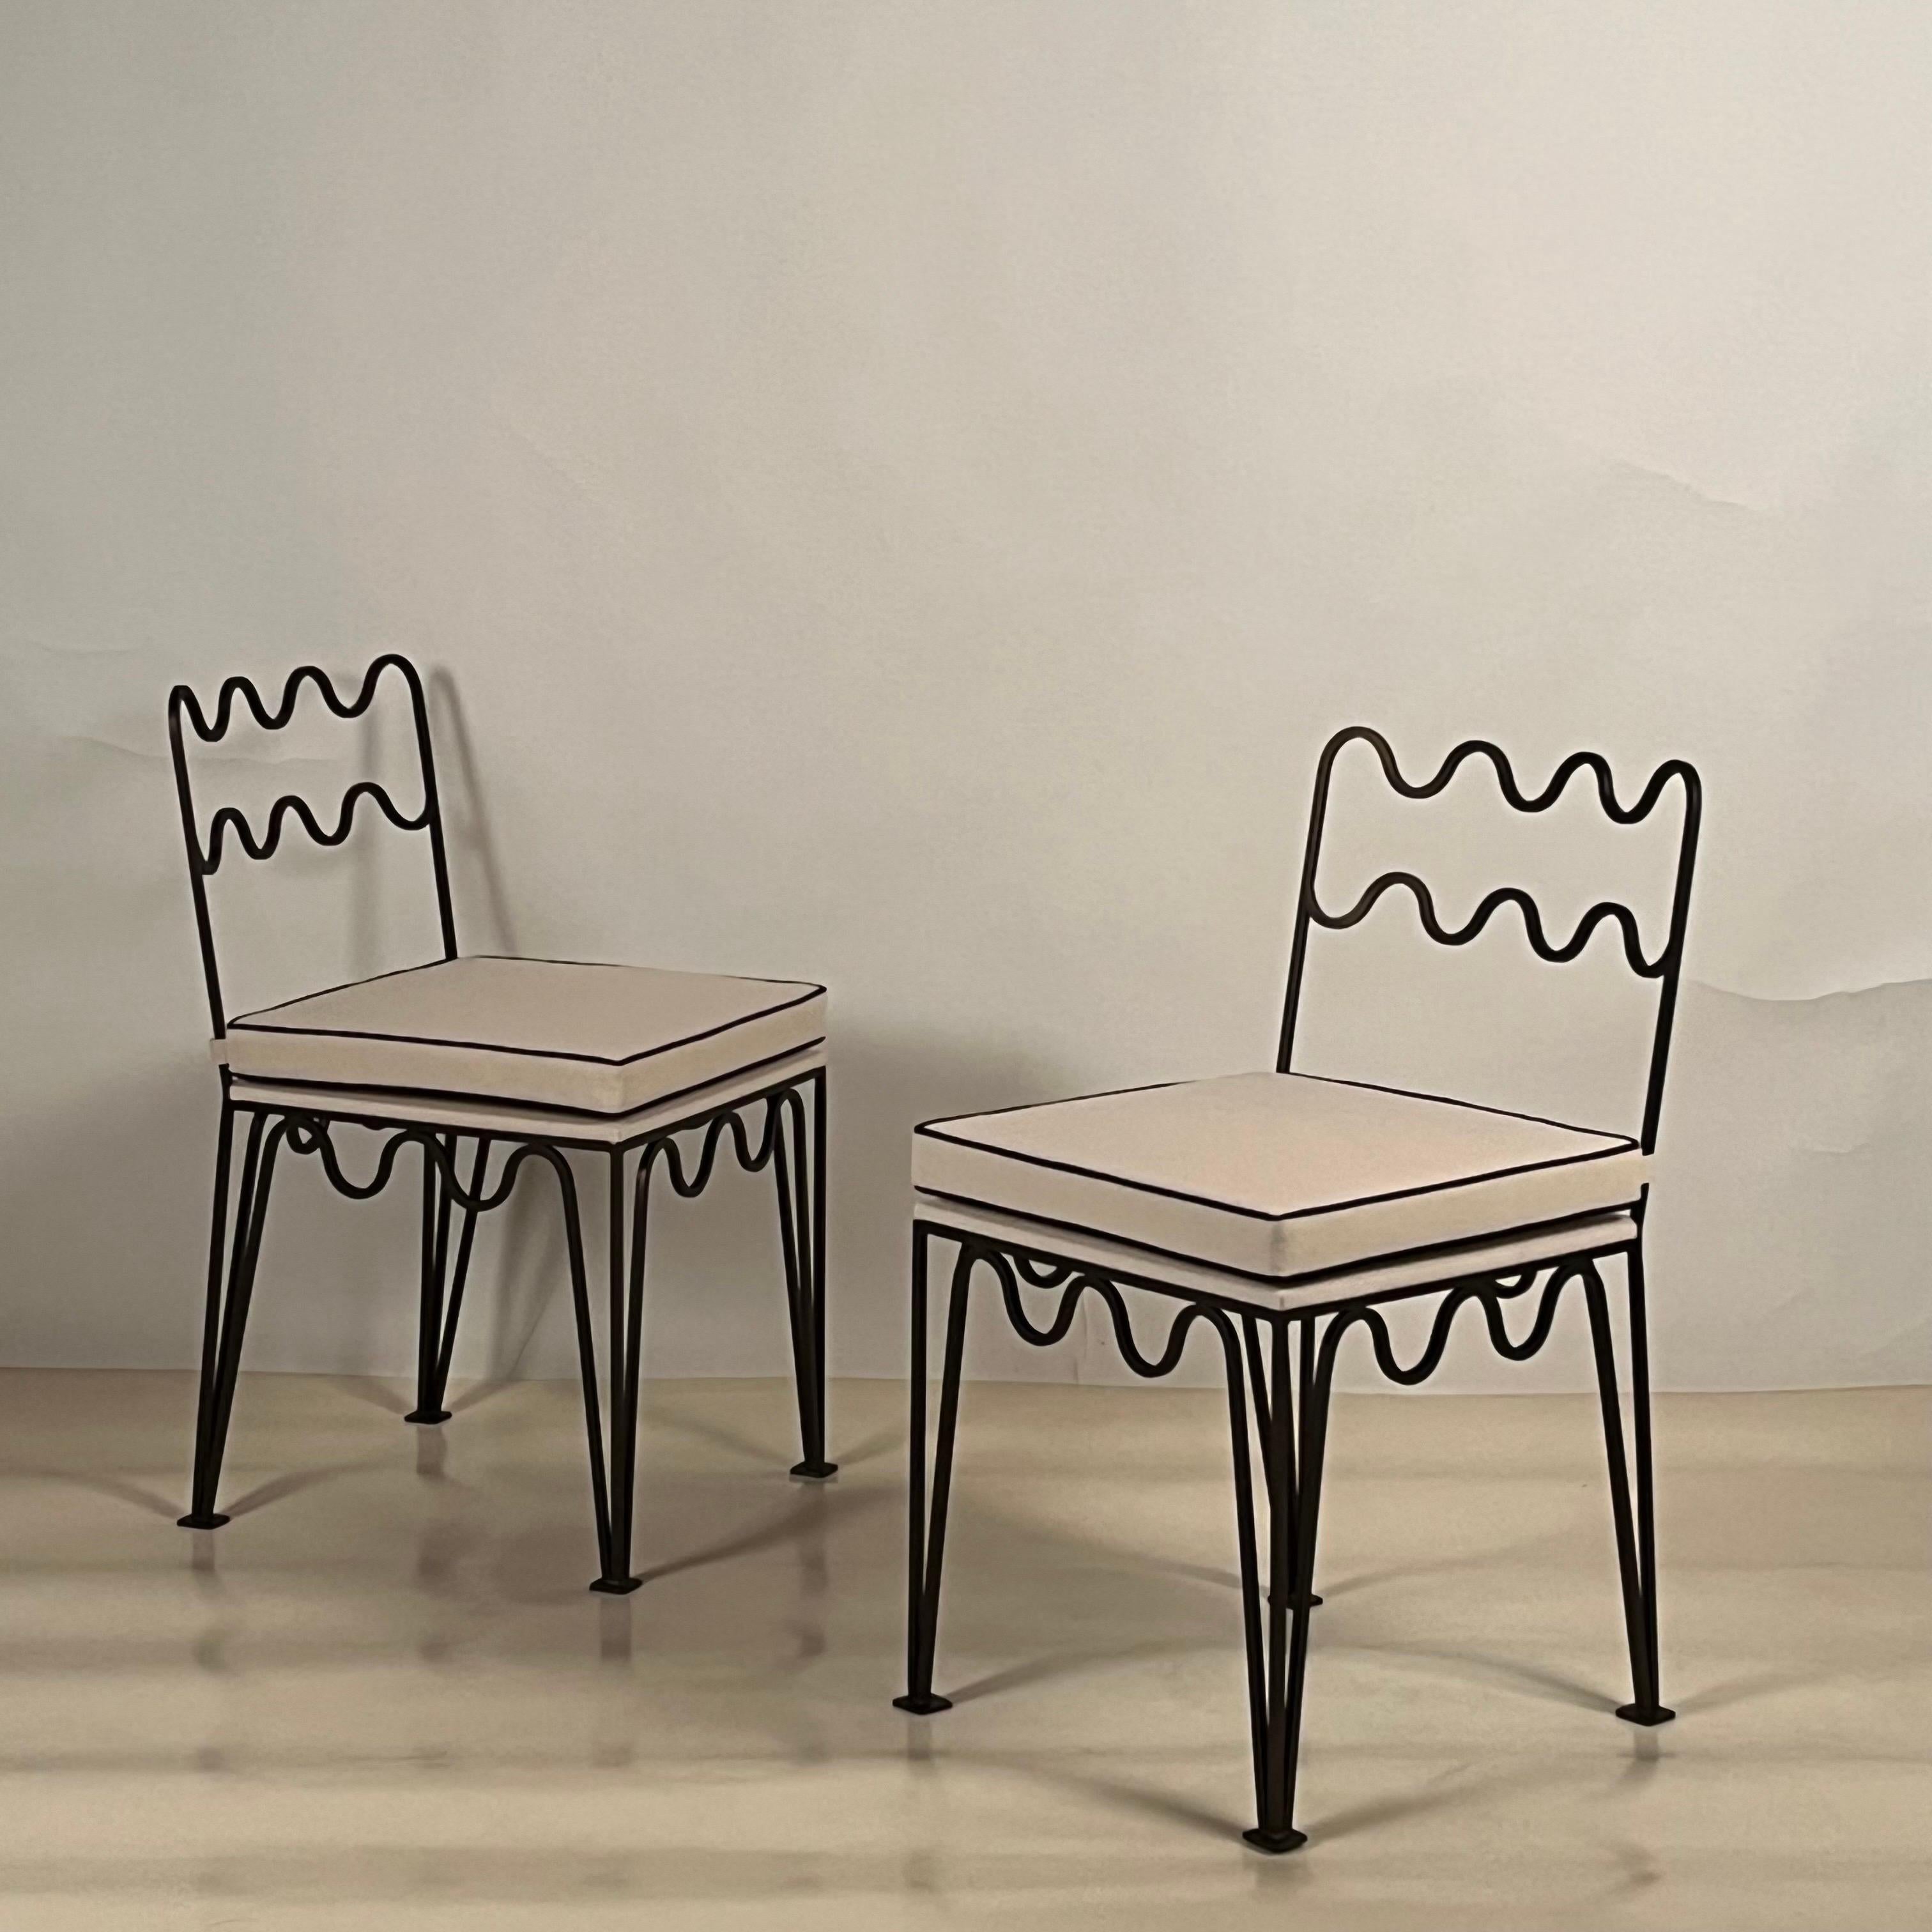 Pair of 'Méandre' dark bronze chairs by Design Frères. Chic and understated.